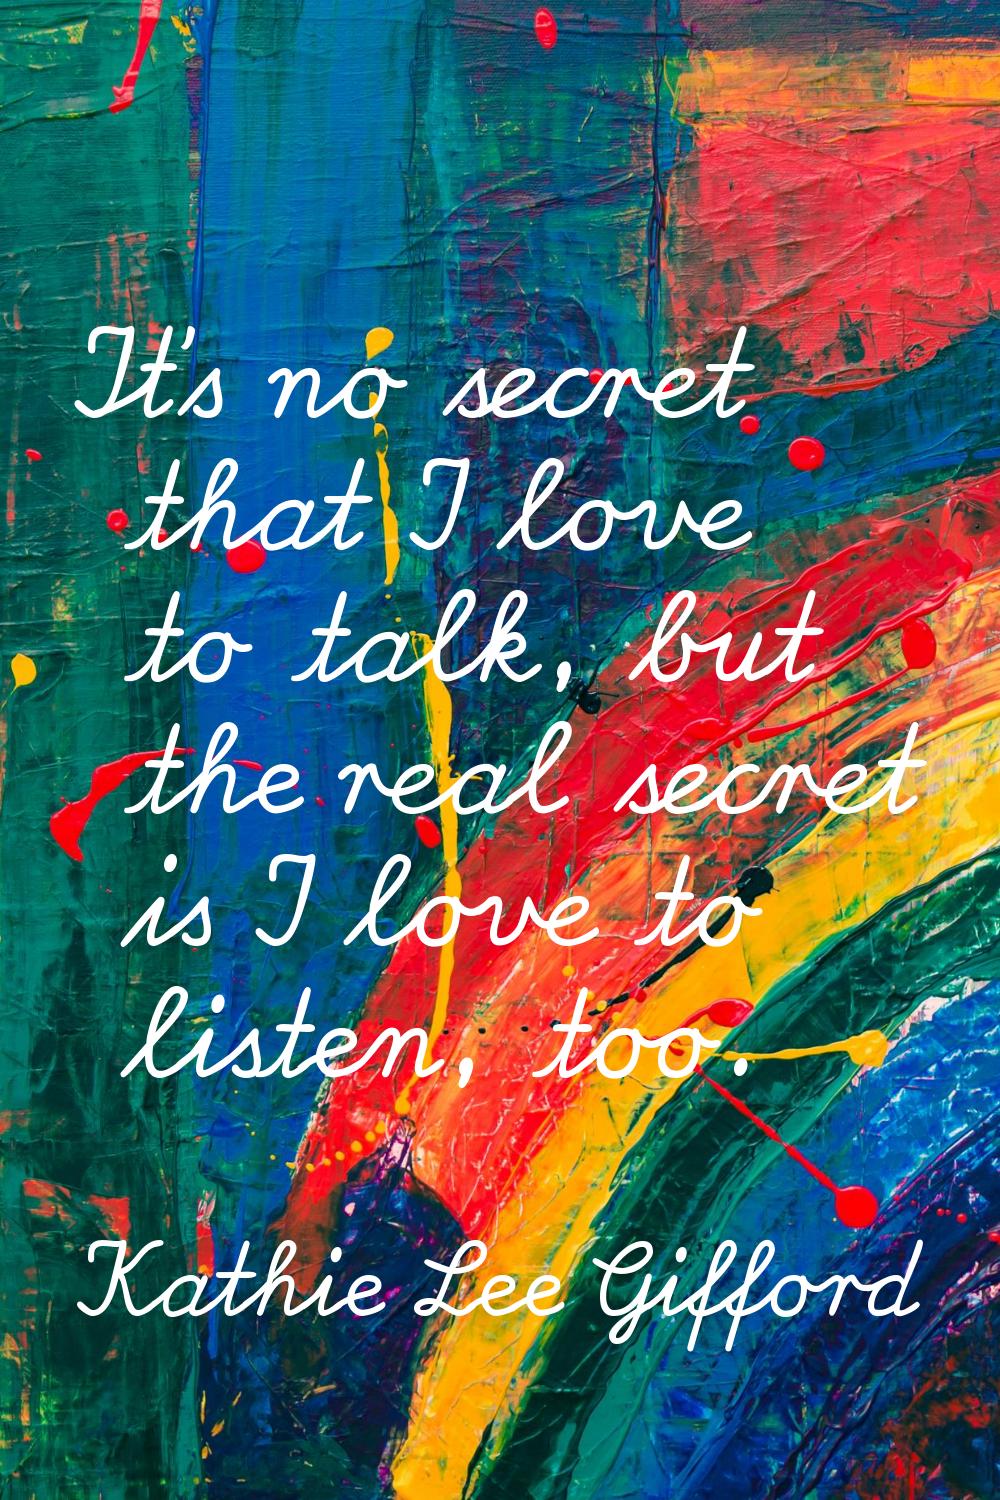 It's no secret that I love to talk, but the real secret is I love to listen, too.